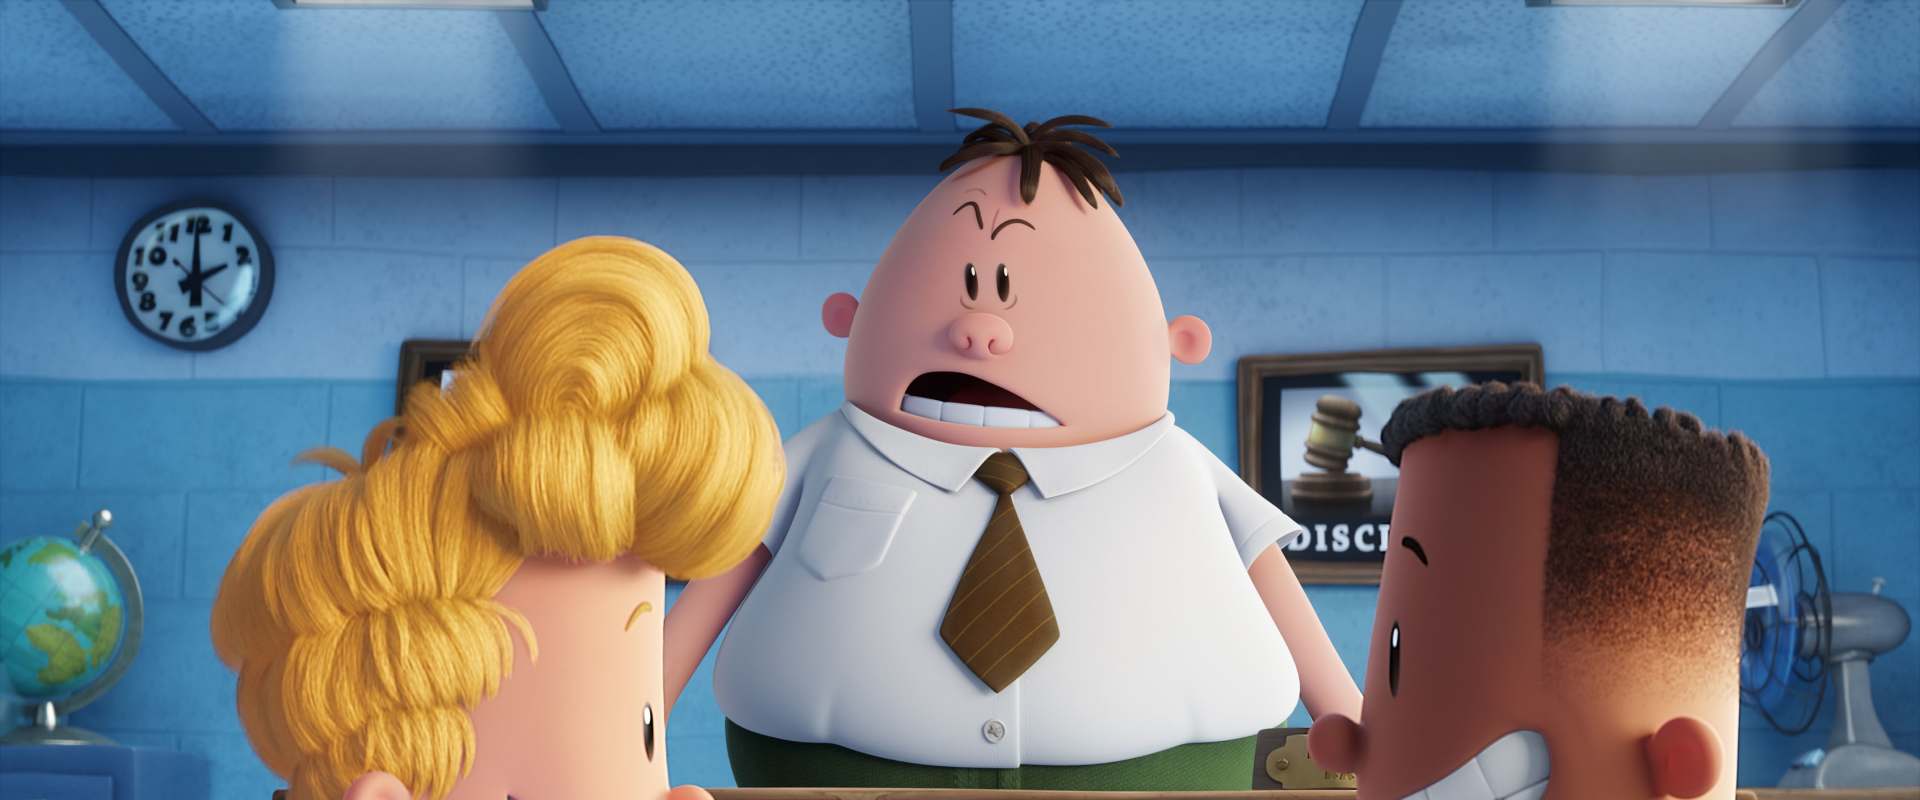 Captain Underpants: The First Epic Movie background 2